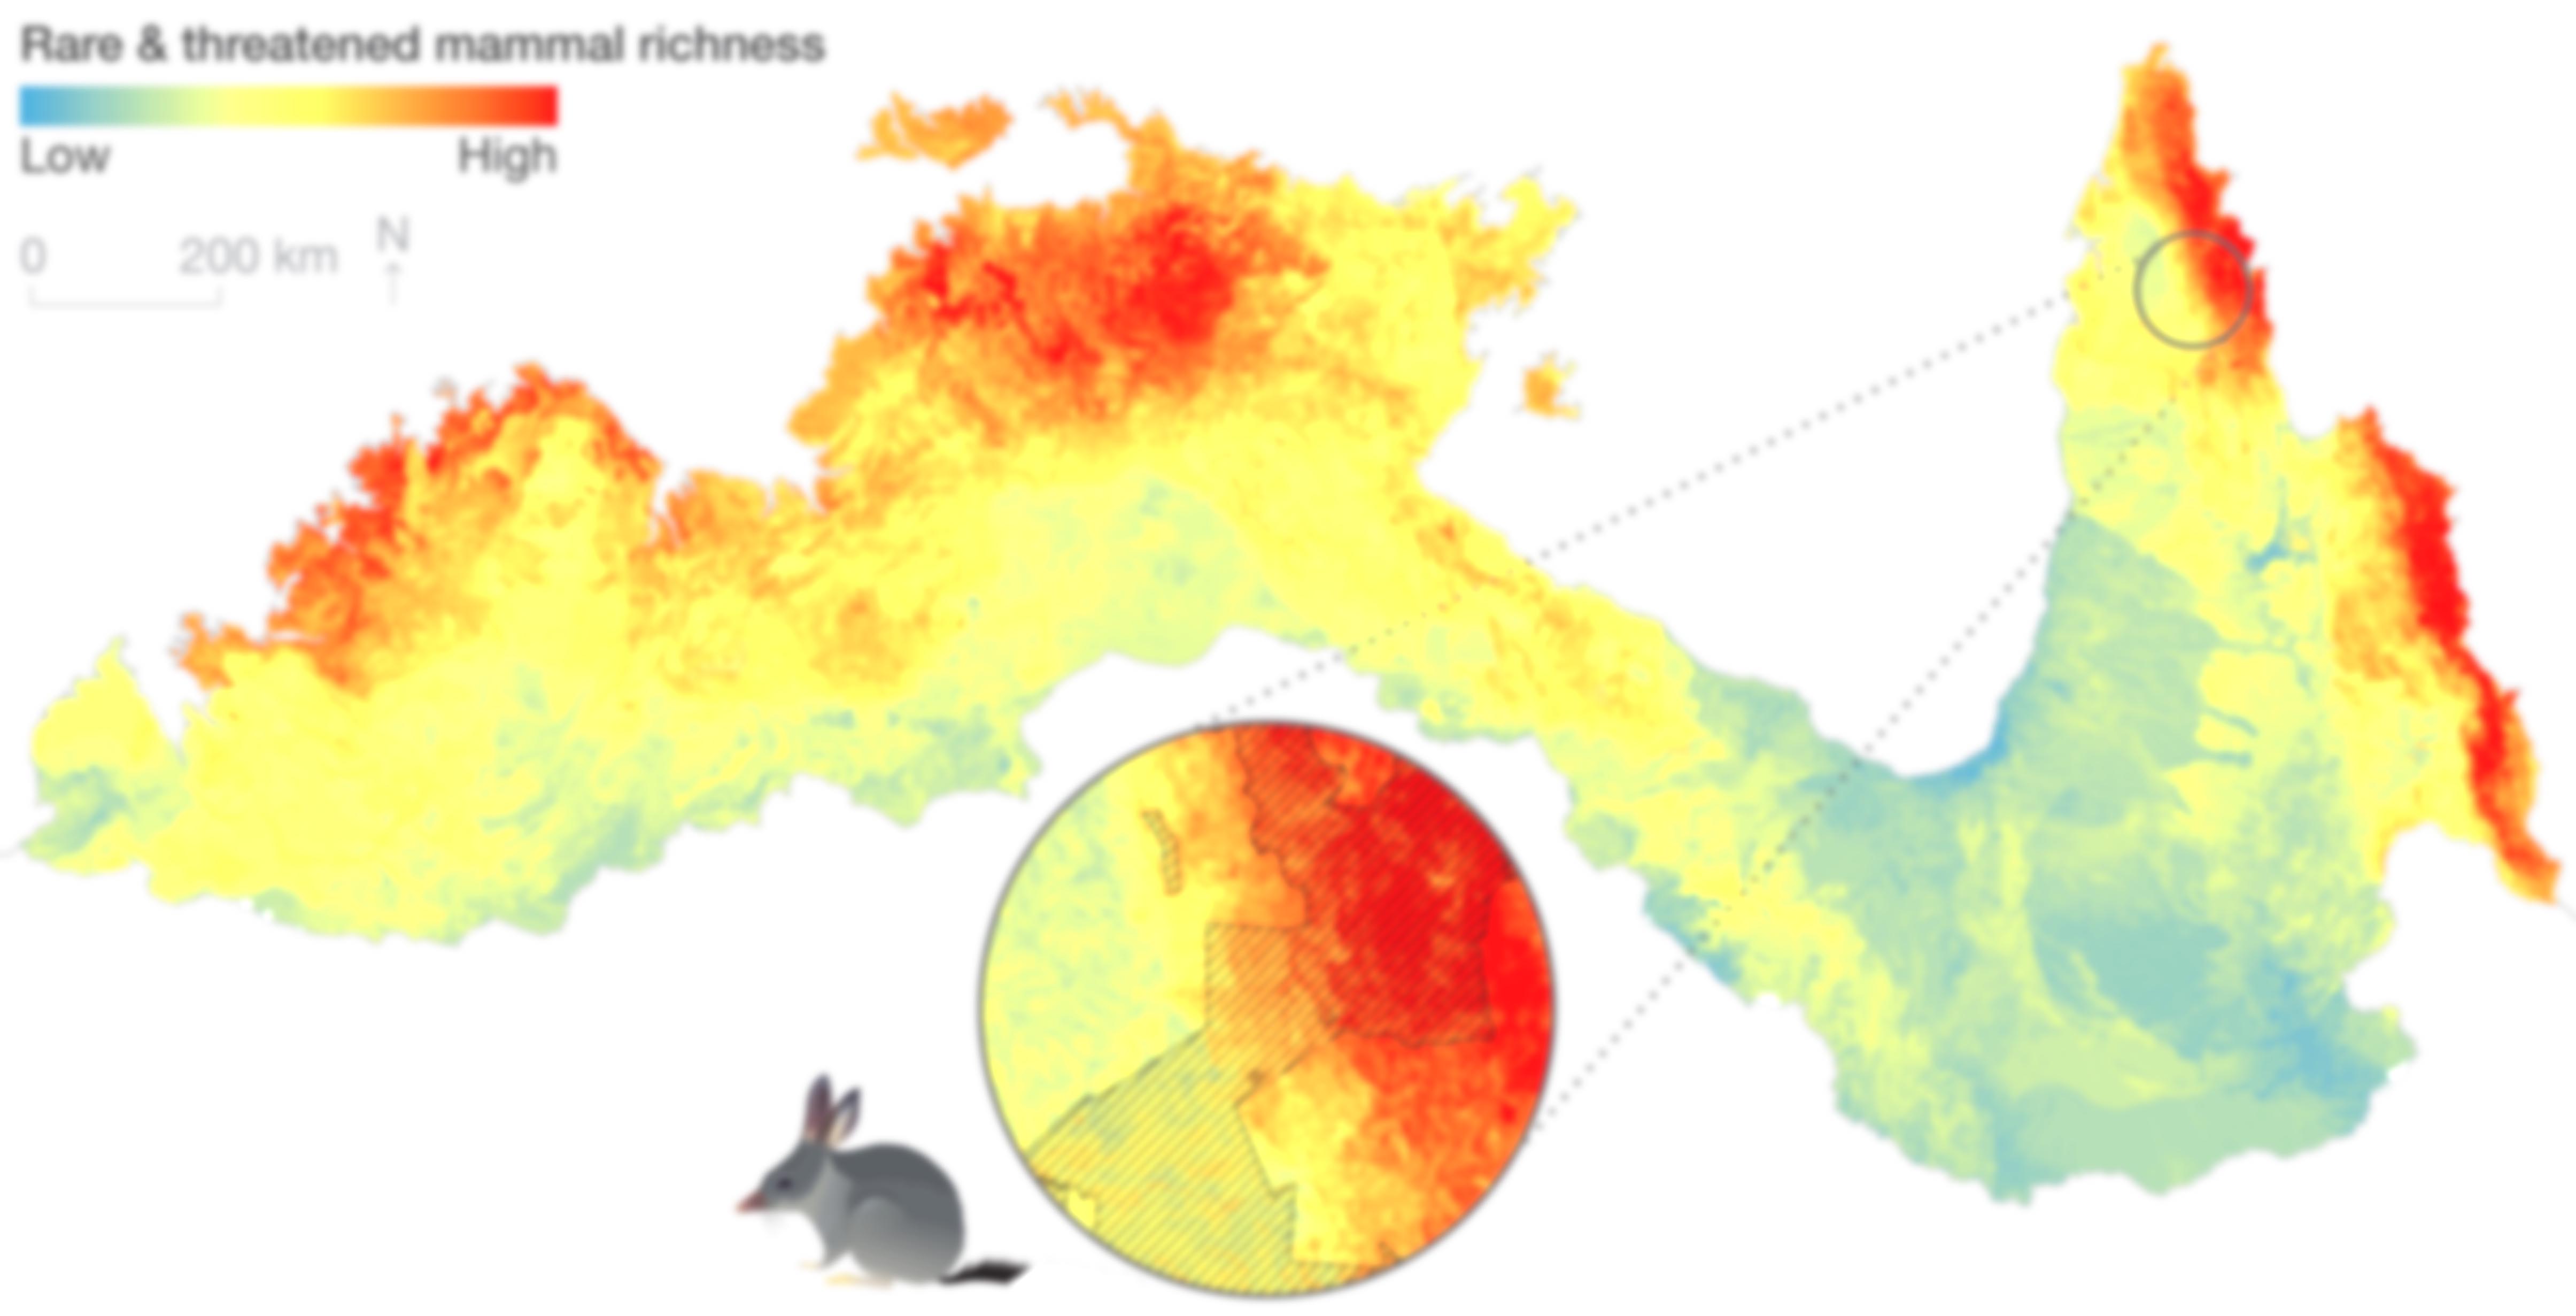 A brightened and blurred version of the 'rare & threatened mammal richness' map which shows hotspots through Kakadu, the Kimberley coastline and the east coast of Cape York.